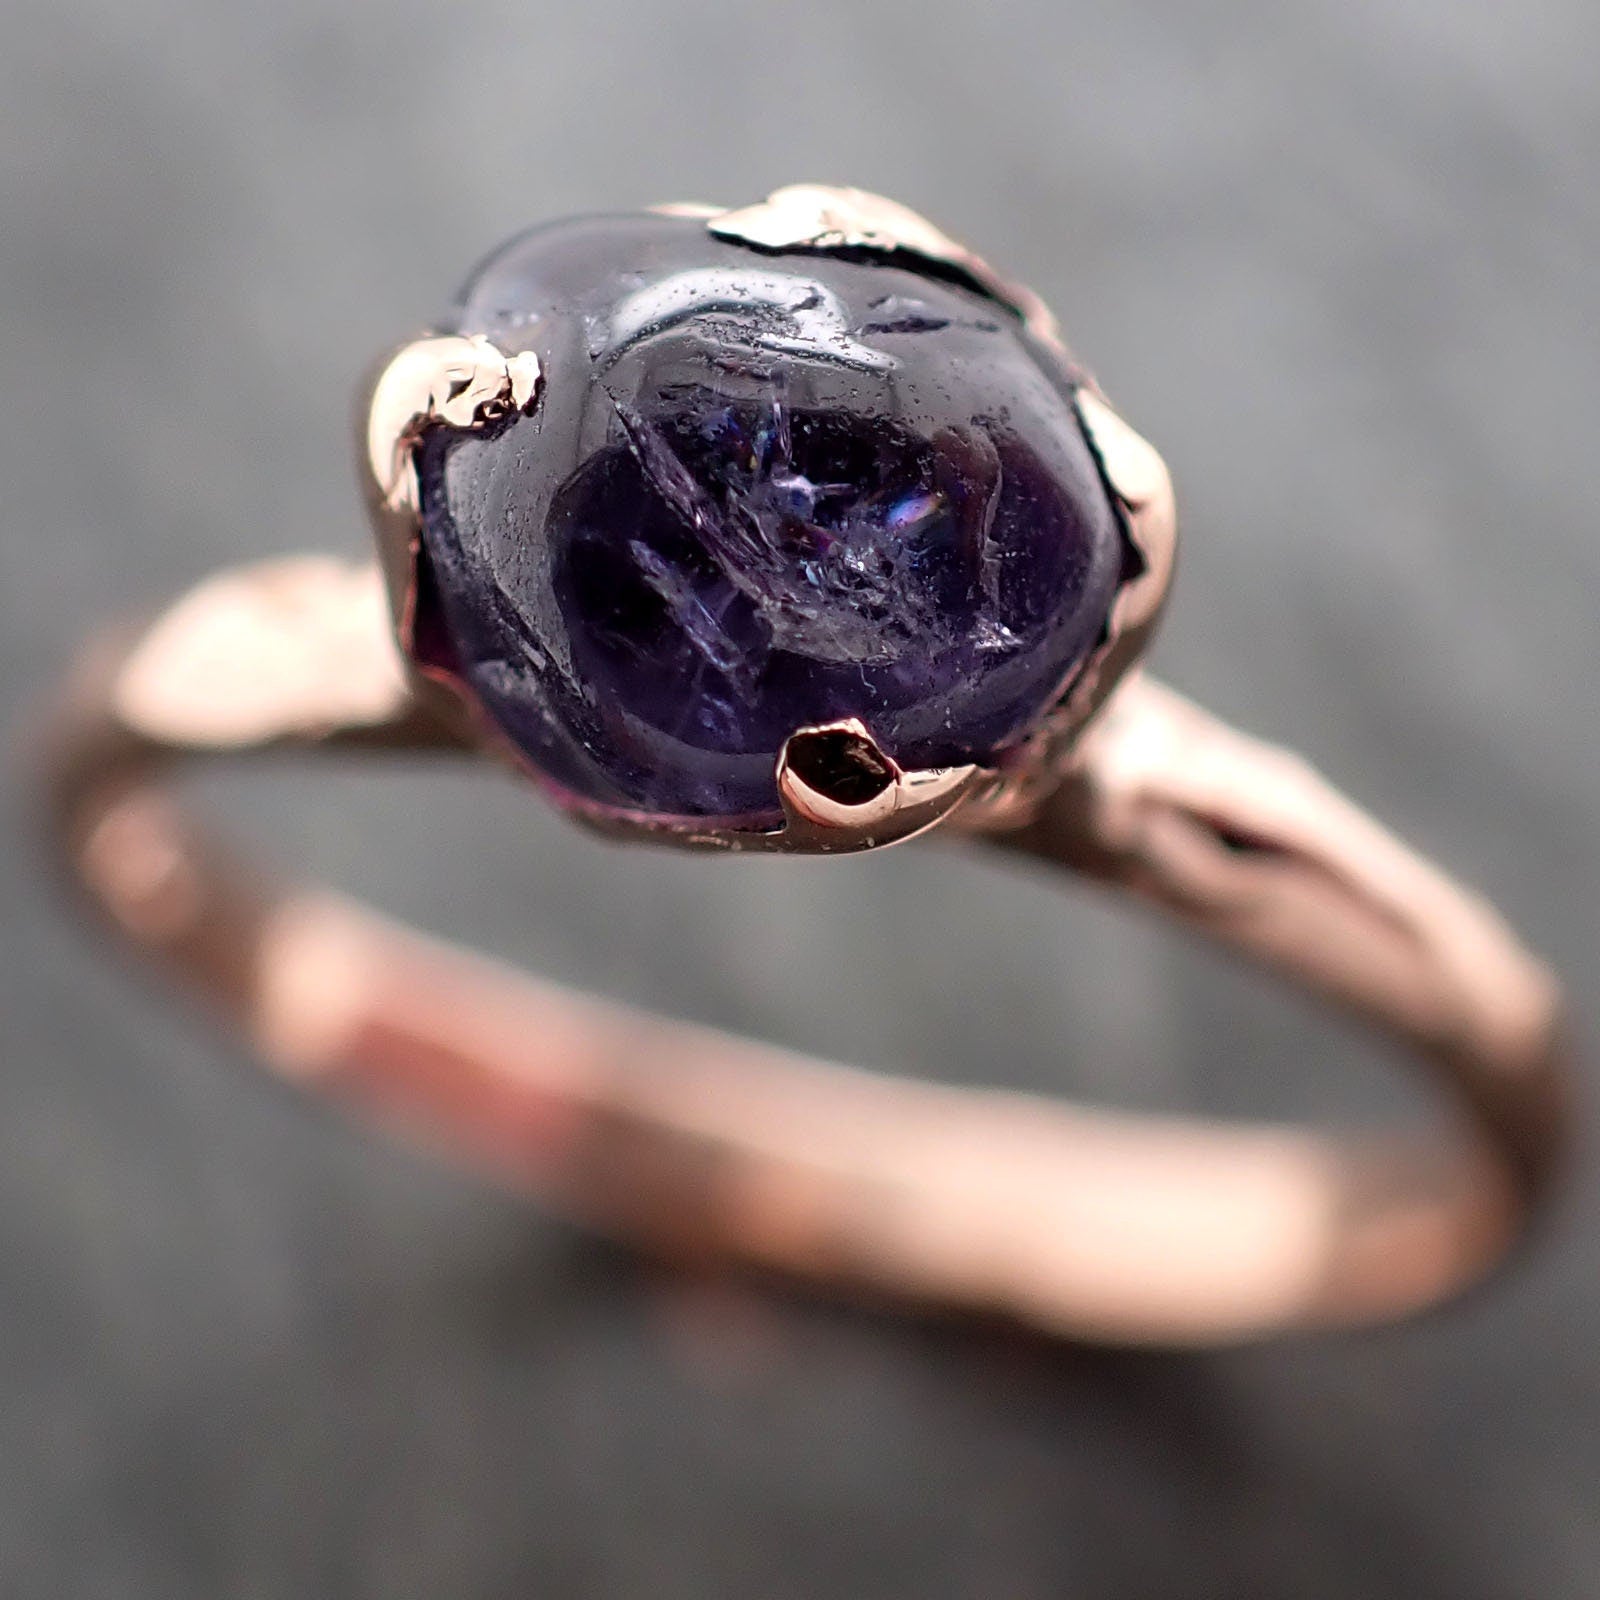 Sapphire Pebble Purple polished 14k Rose gold Solitaire gemstone ring 2896